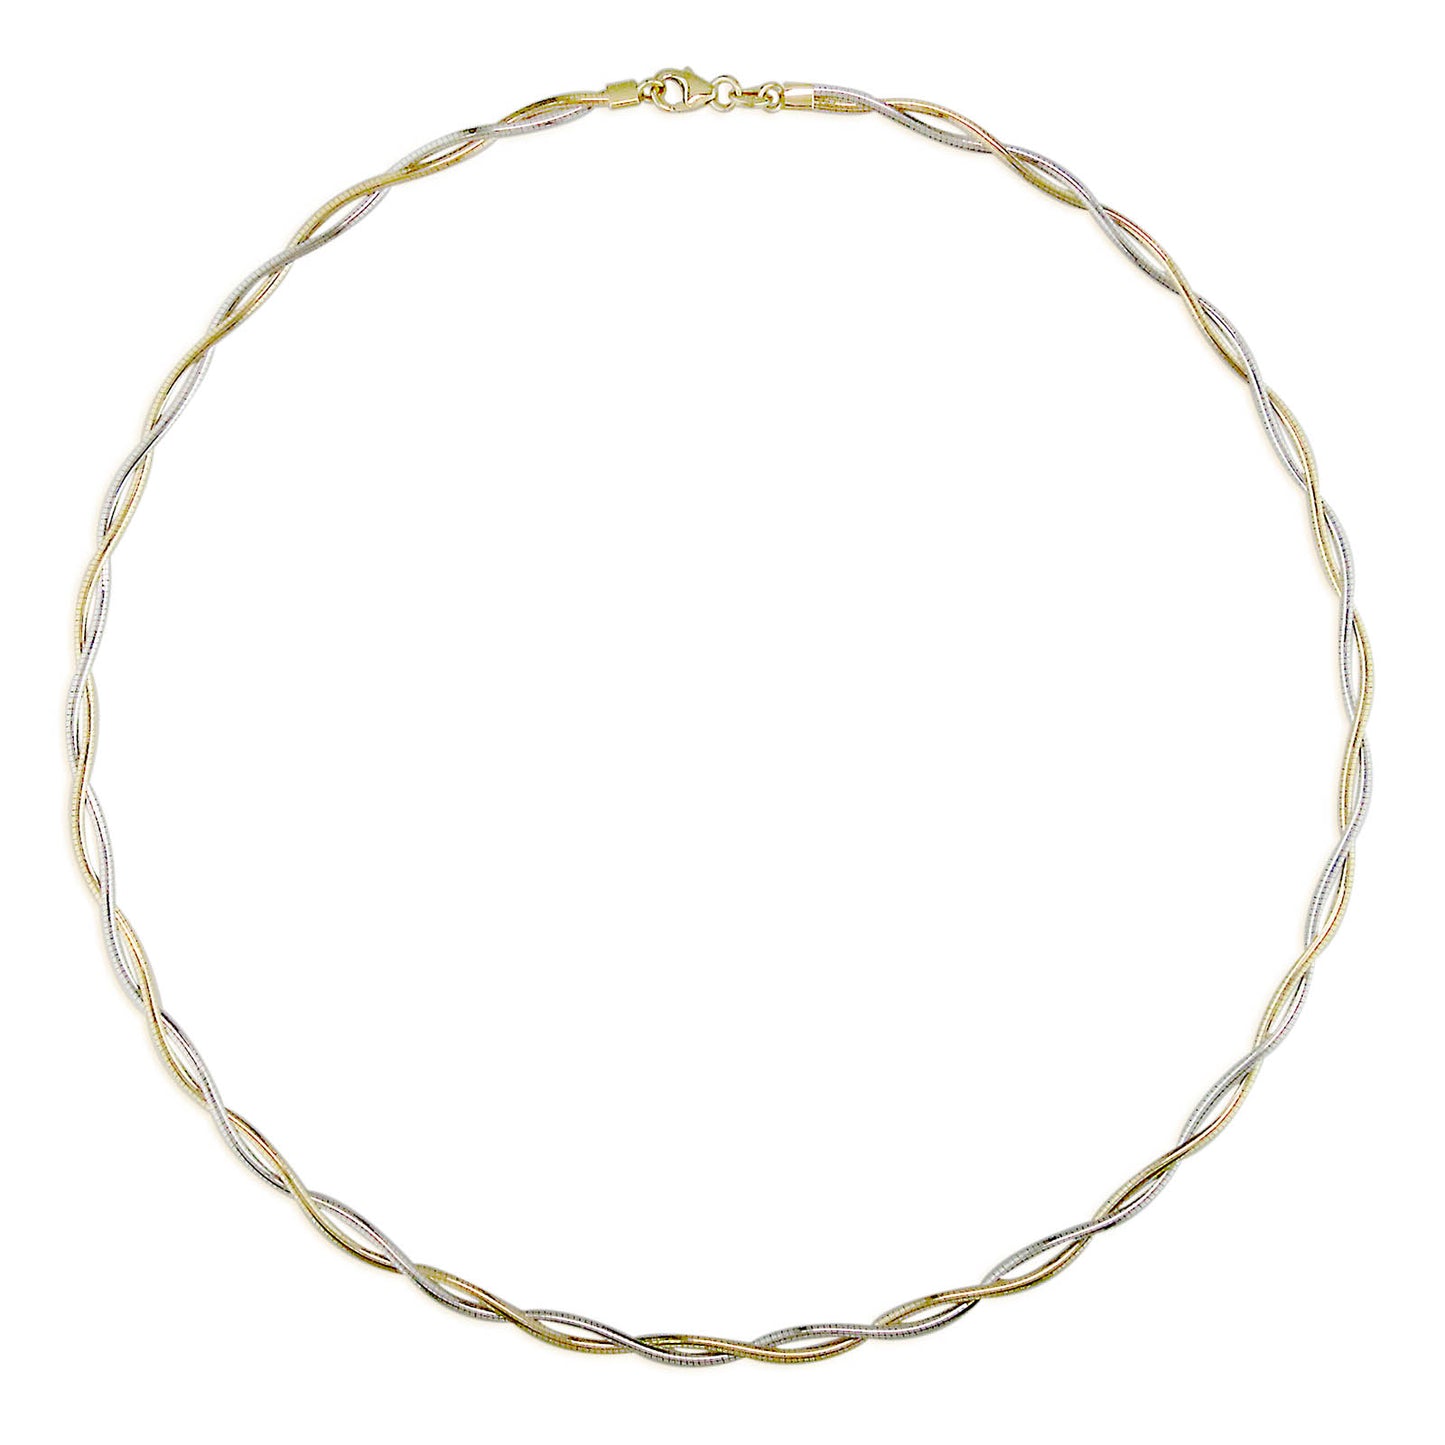 700161 - 14K White Gold and 14K Yellow Gold - 18" Twisted Two-Toned Omega Necklace